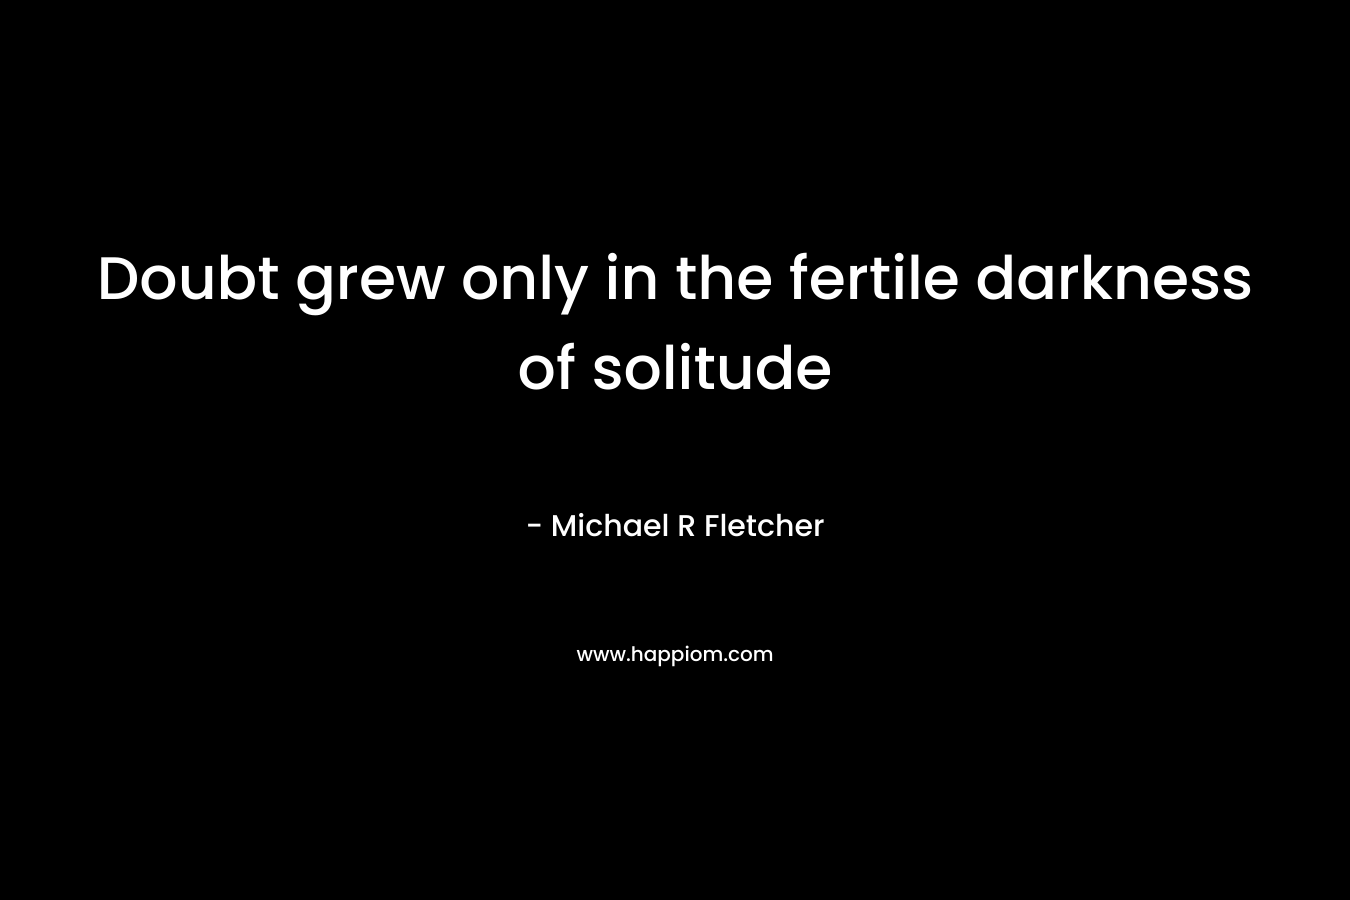 Doubt grew only in the fertile darkness of solitude